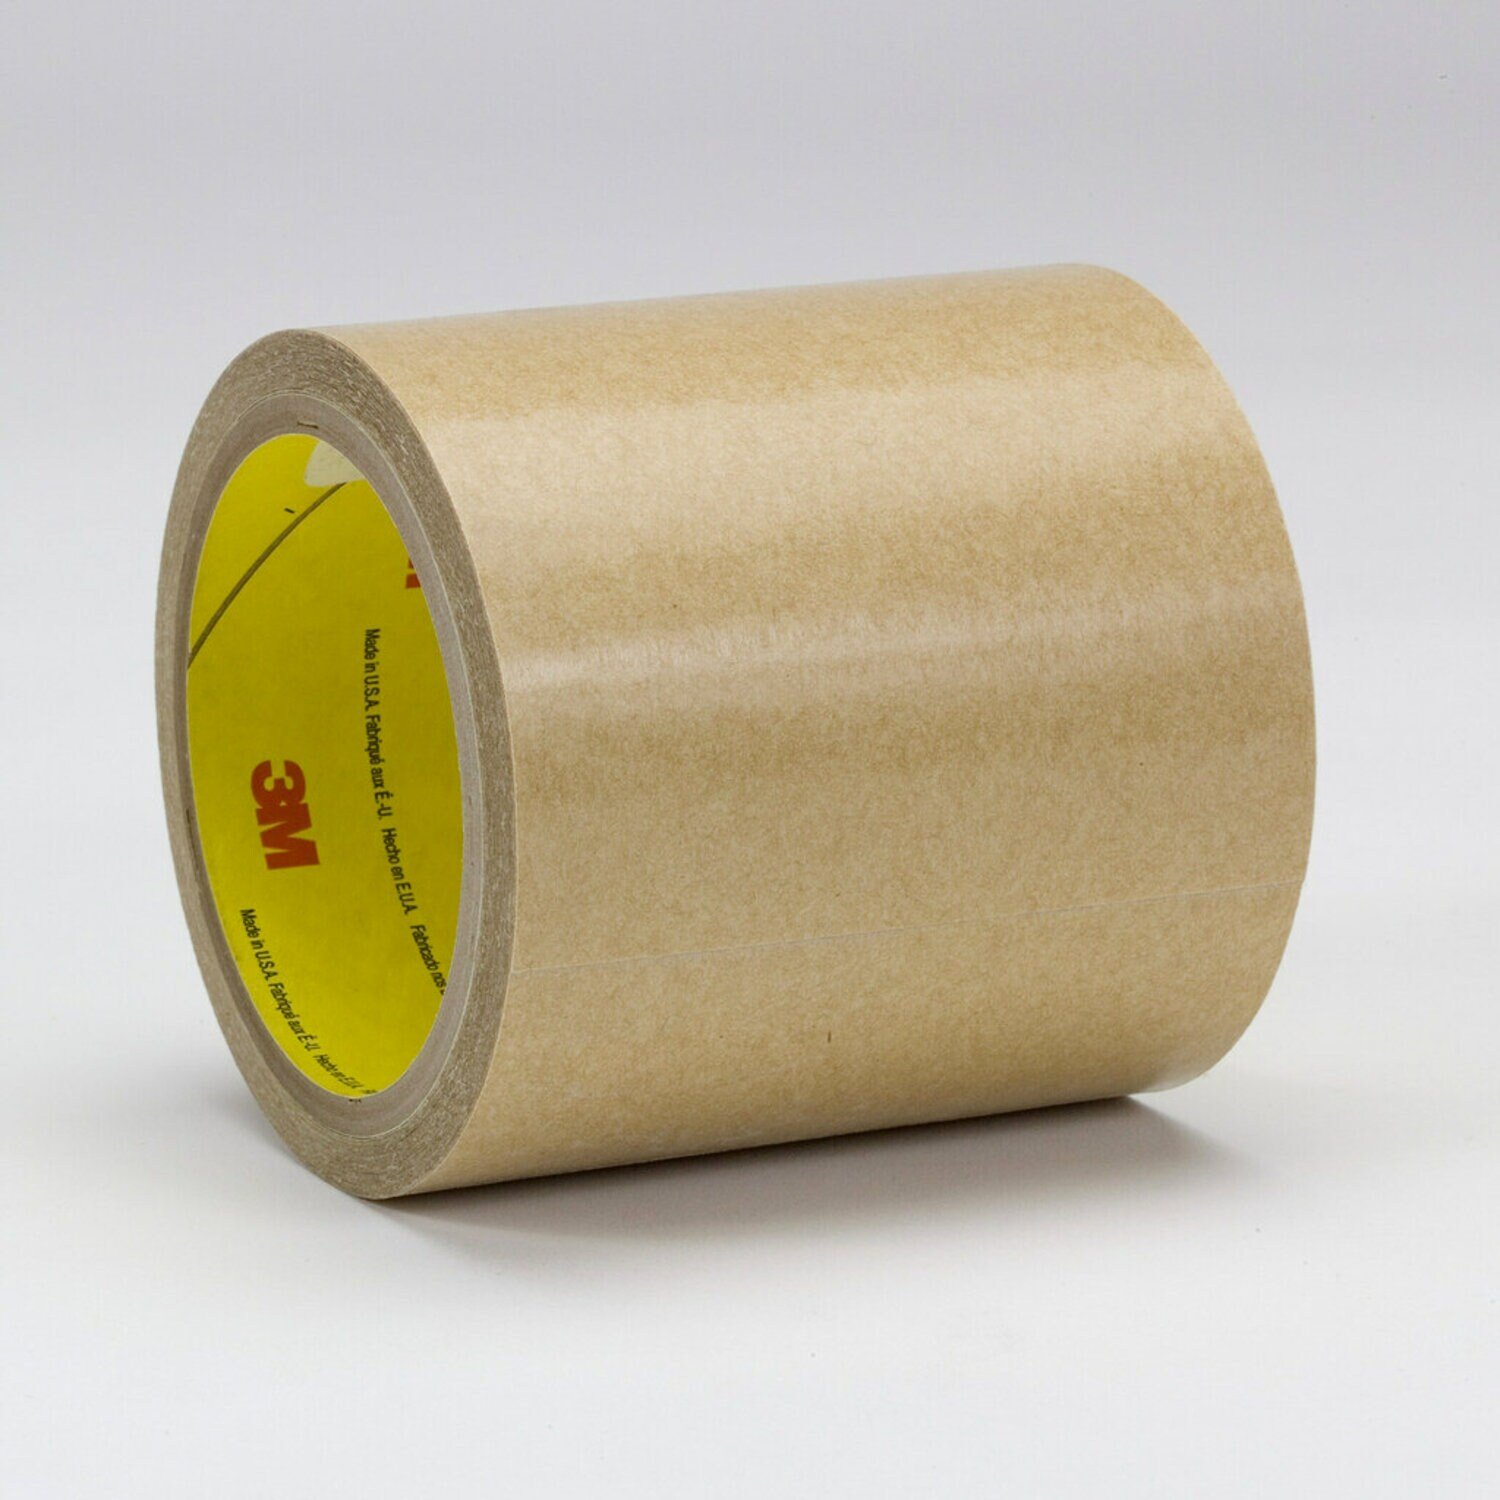 7010372139 - 3M Adhesive Transfer Tape 950, Clear, 0.37 in x 180 yd, 5 Mil, 24/Case